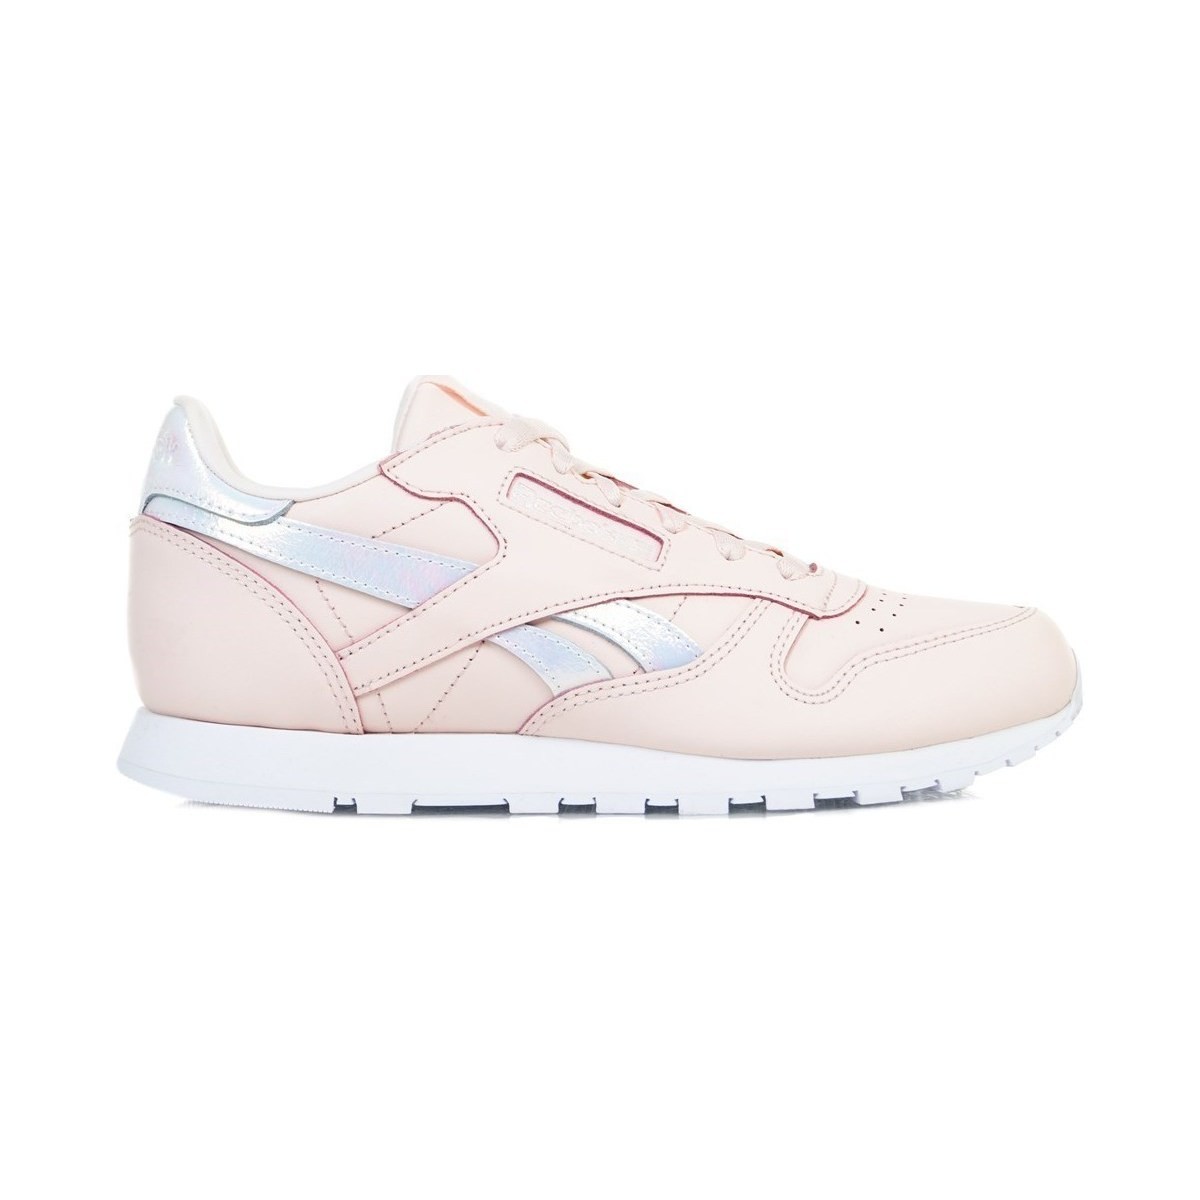 Shoes Children Low top trainers Reebok Sport Classic Leather Pink